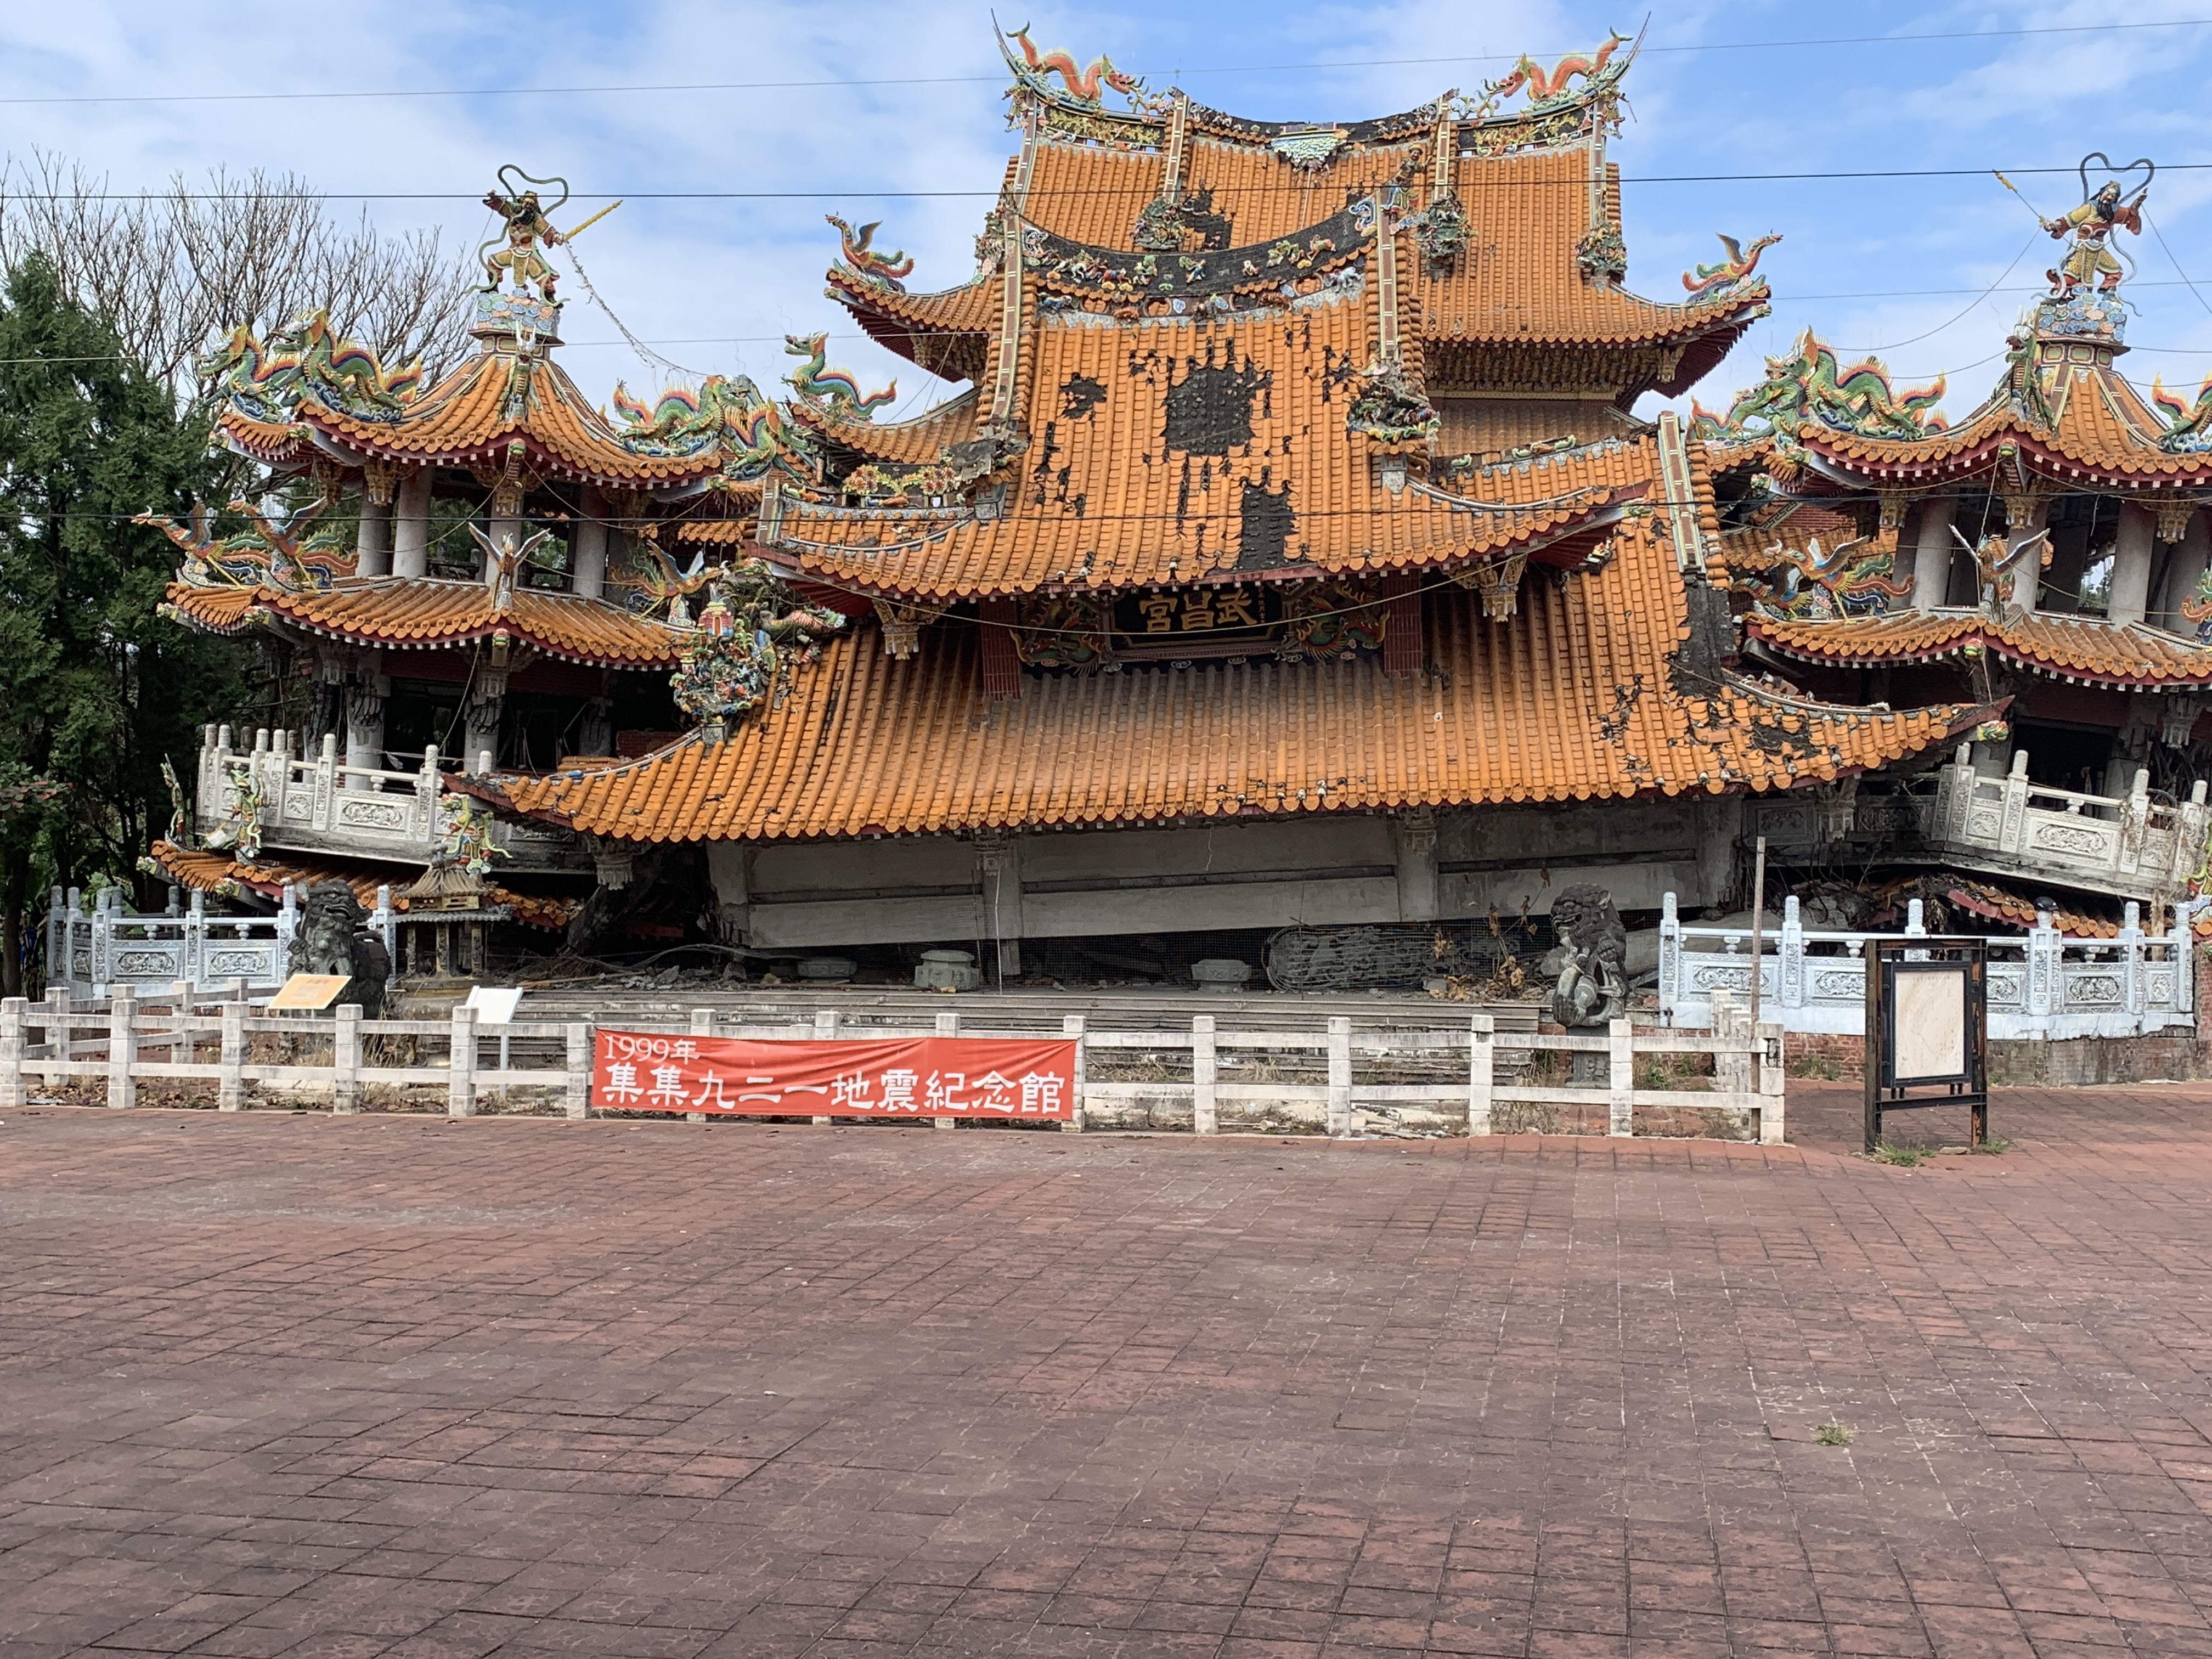 Thean Hou Temple with a red roof